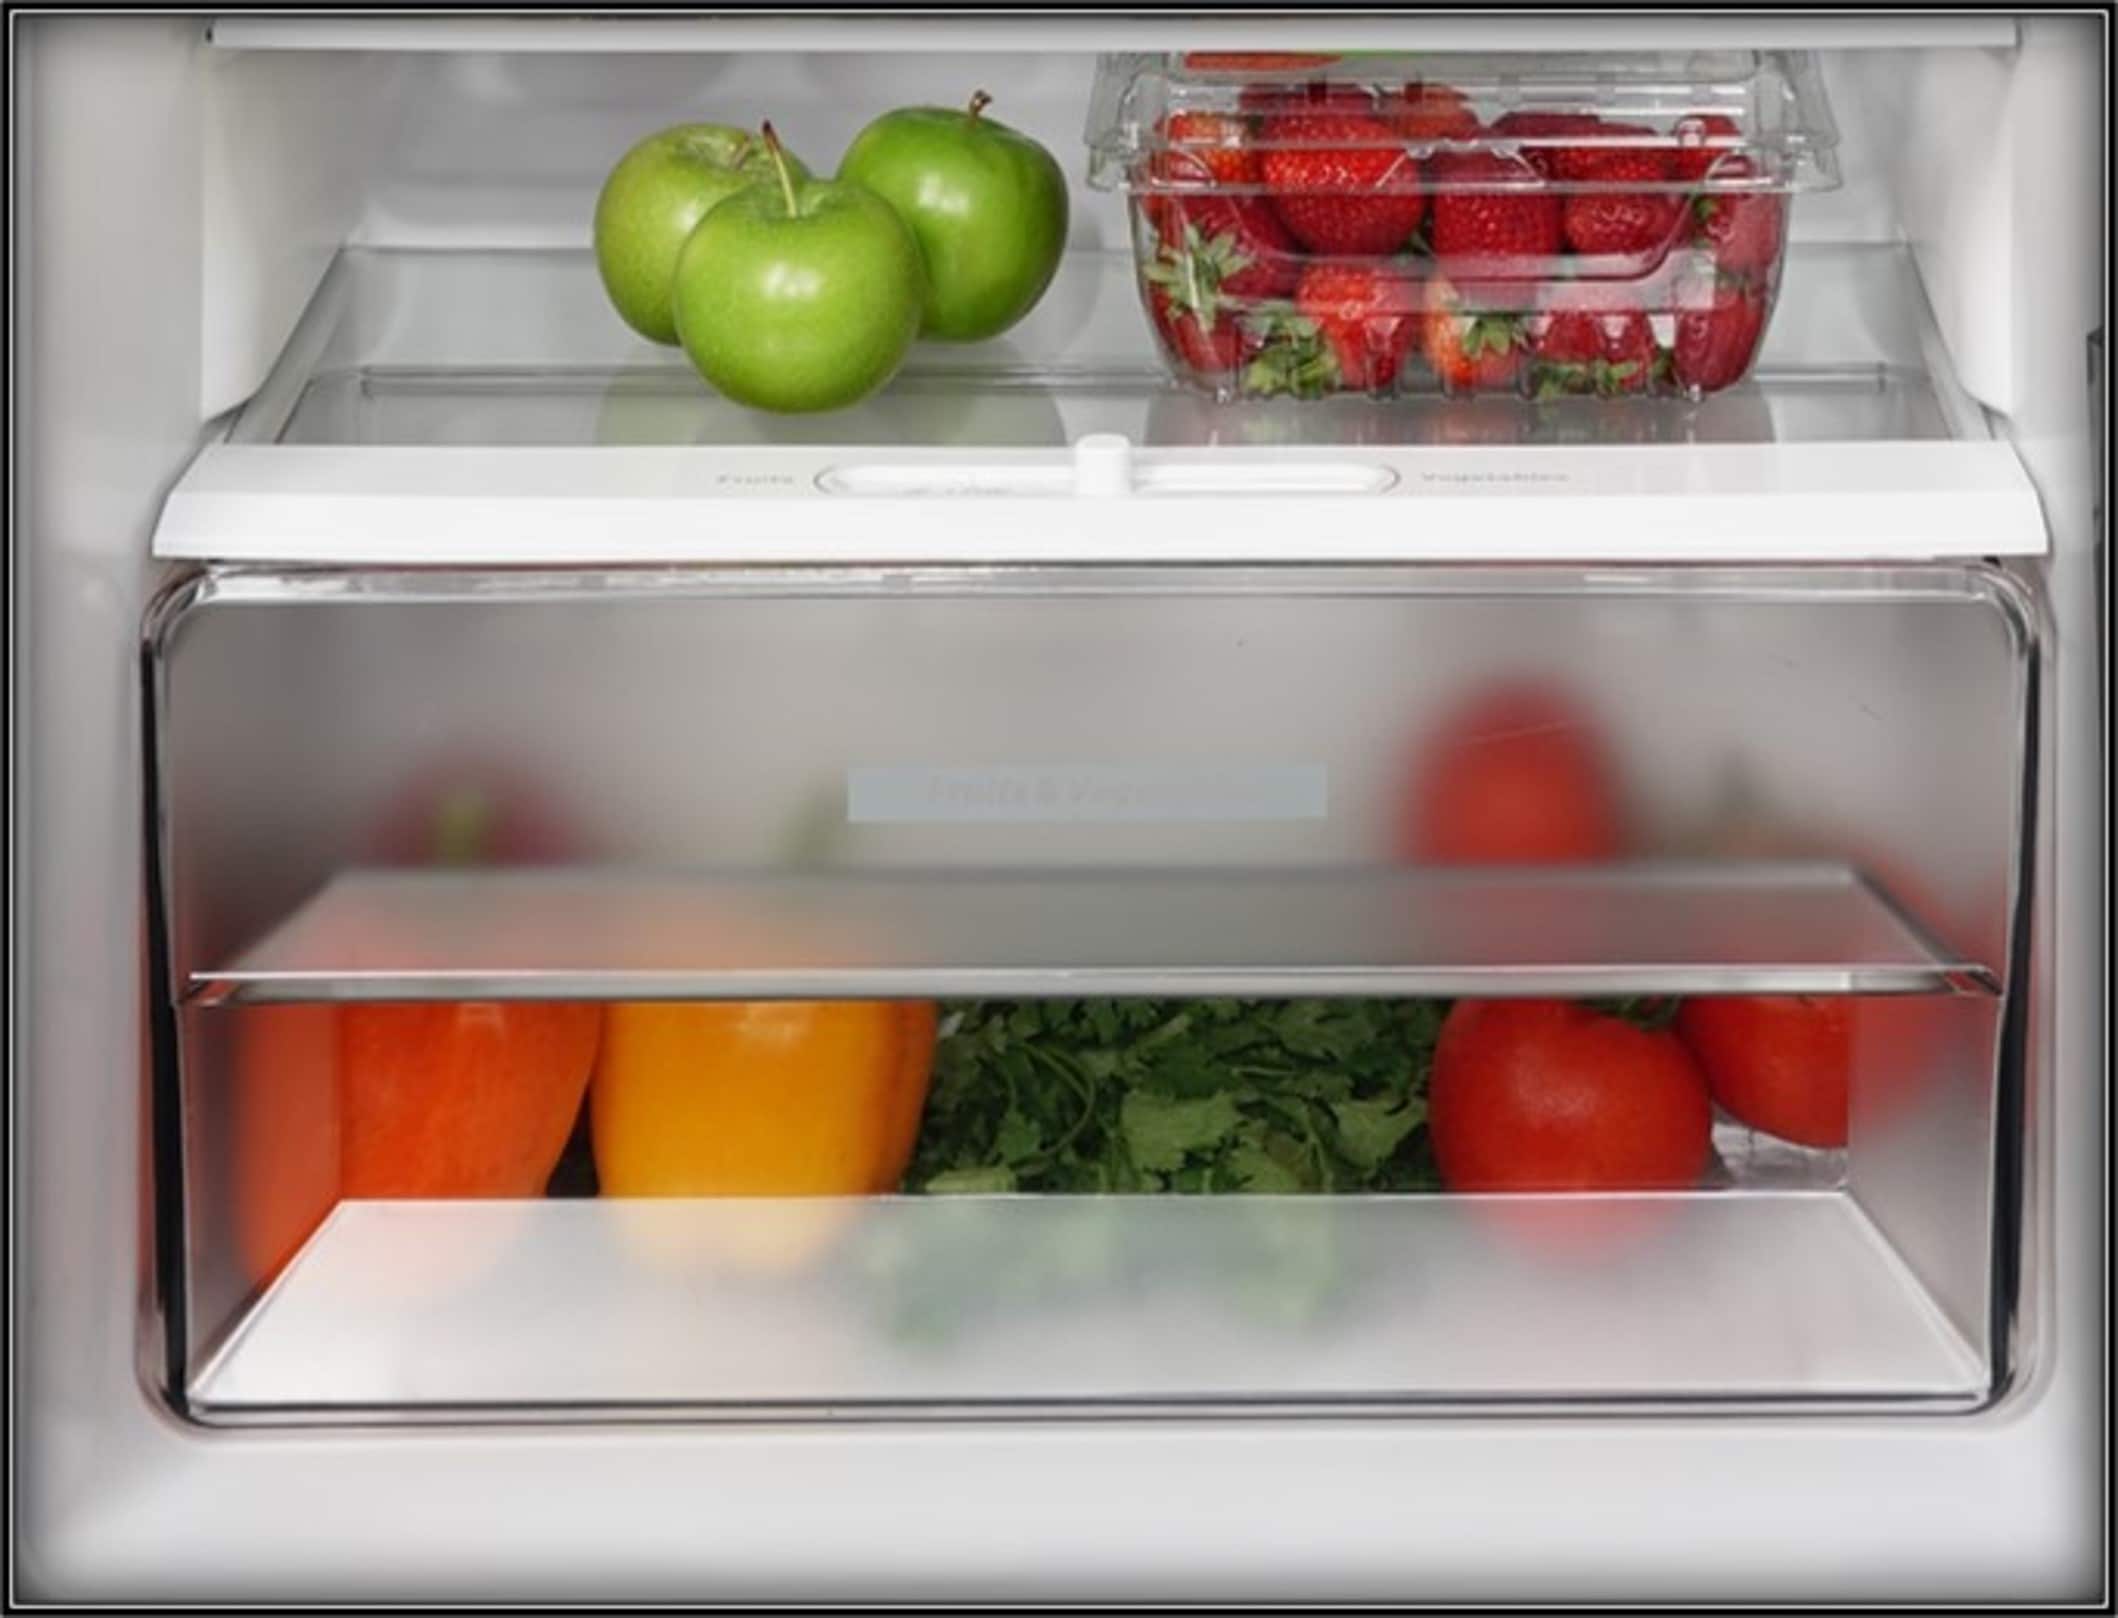 Premium Levella PRN7006HS 7.1 CuFt Frost Free Top-Mount Refrigerator with  Slide-Out Food Tray and Electronic Temperature Controls in Inox